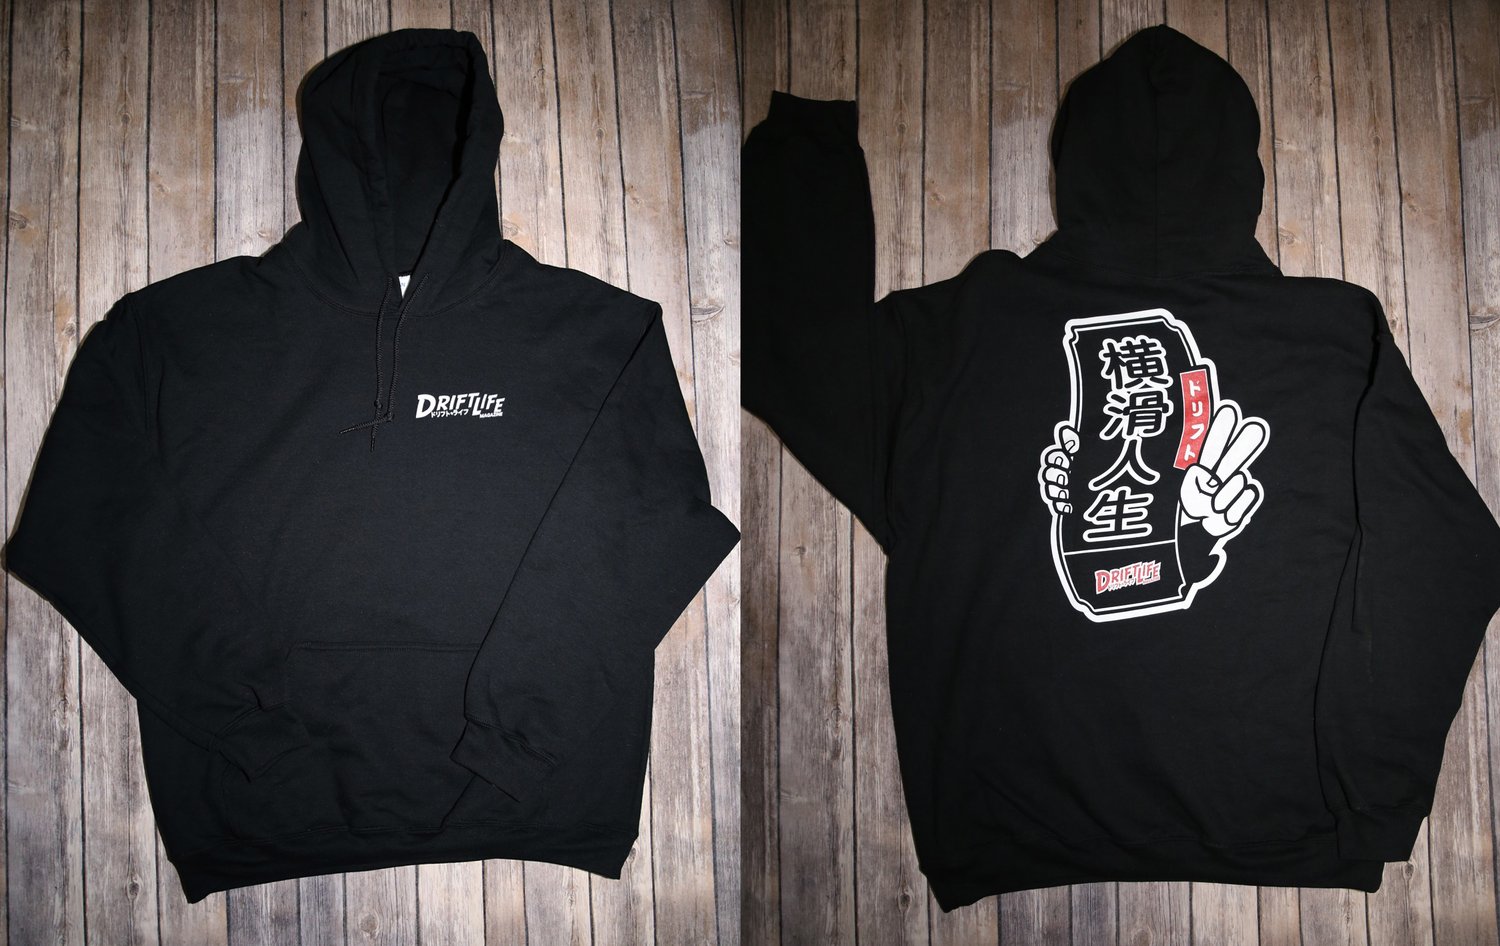 Image of "DRIFT LIFE" pullover hoodie